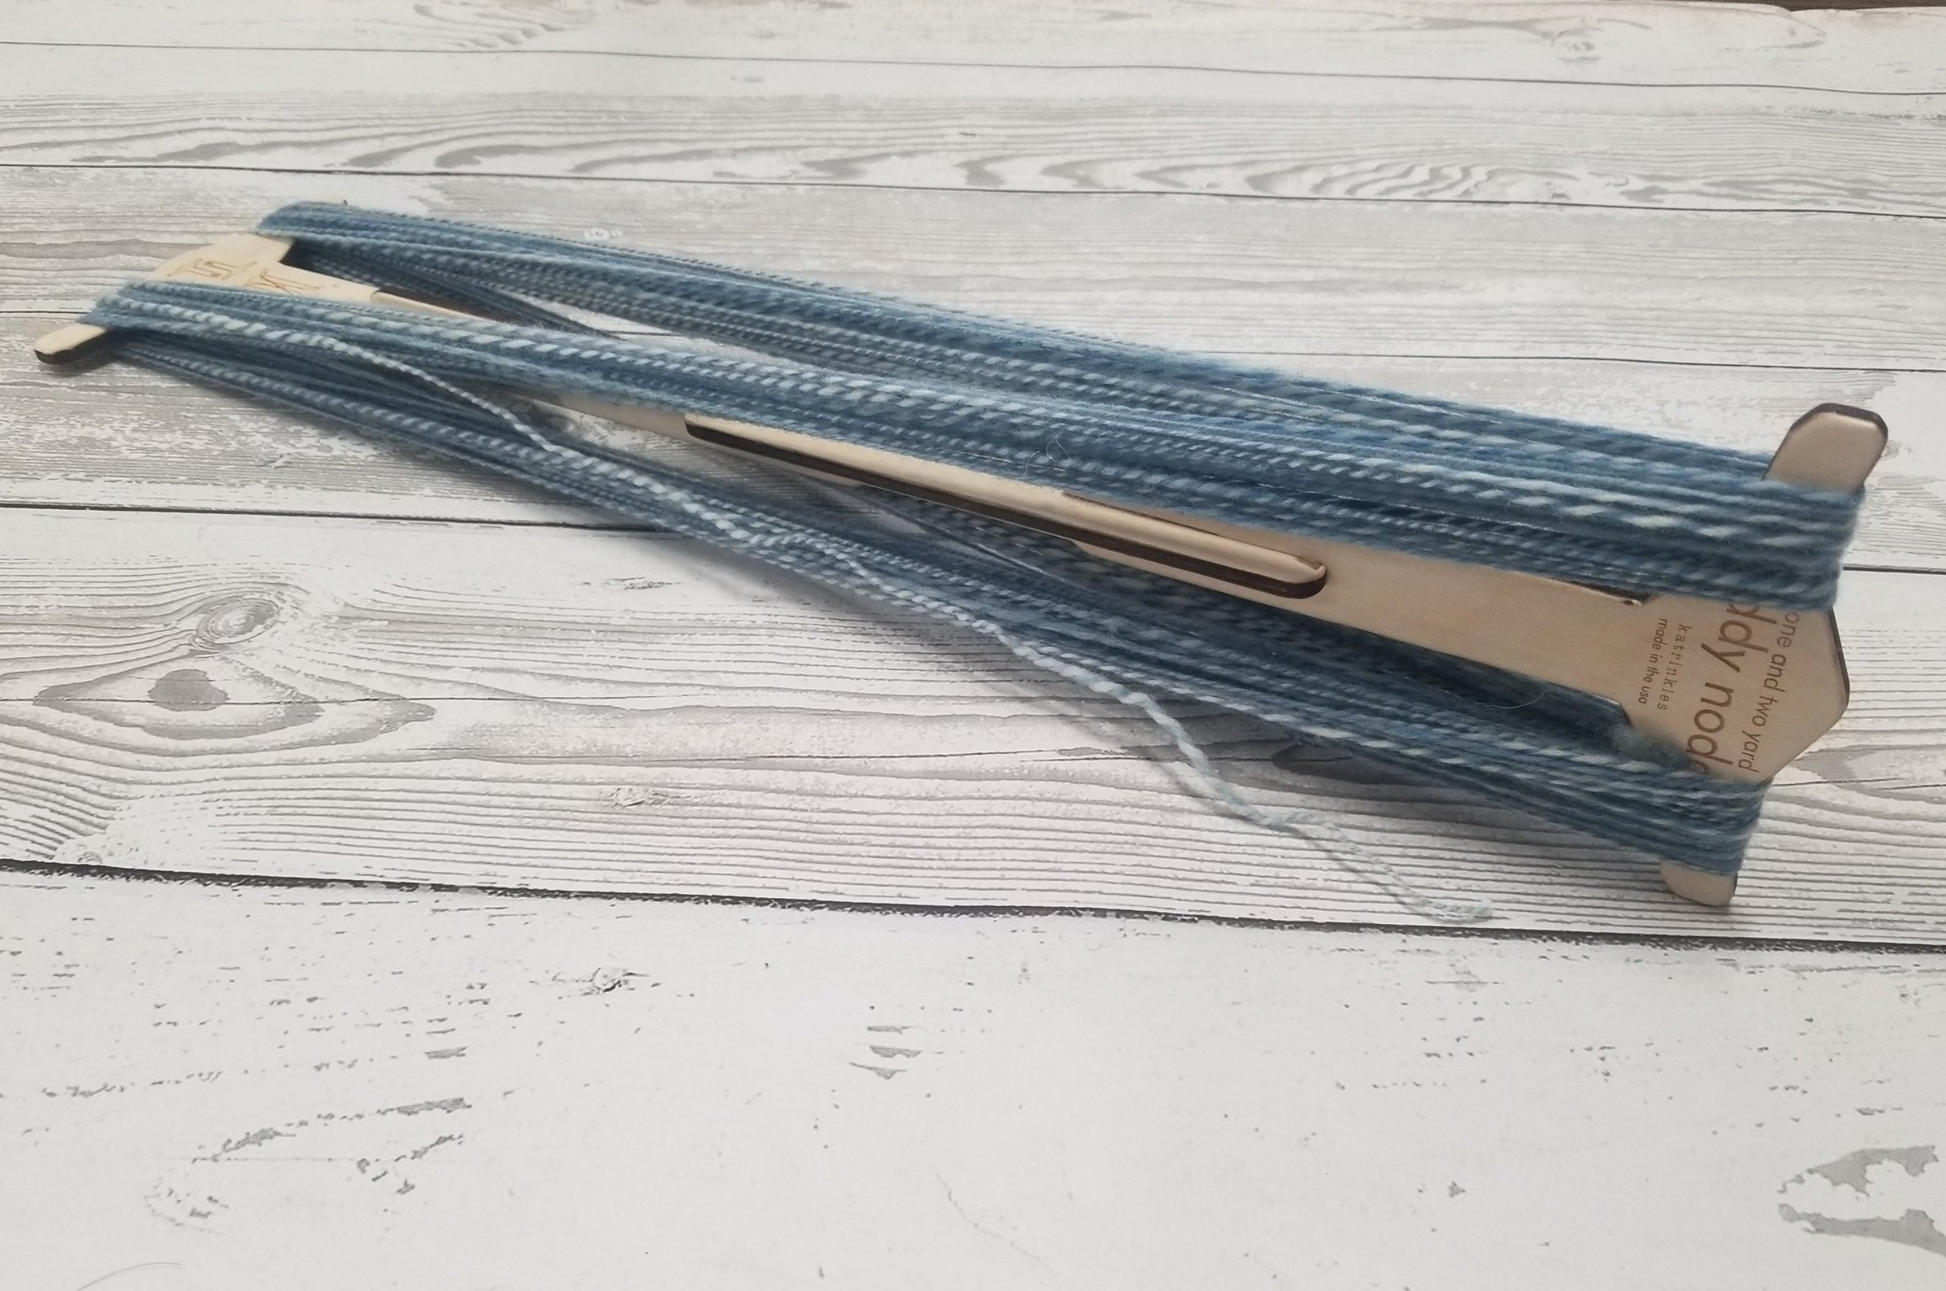 Tools for Taming Yarn: Niddy Noddies - Knitter's Review